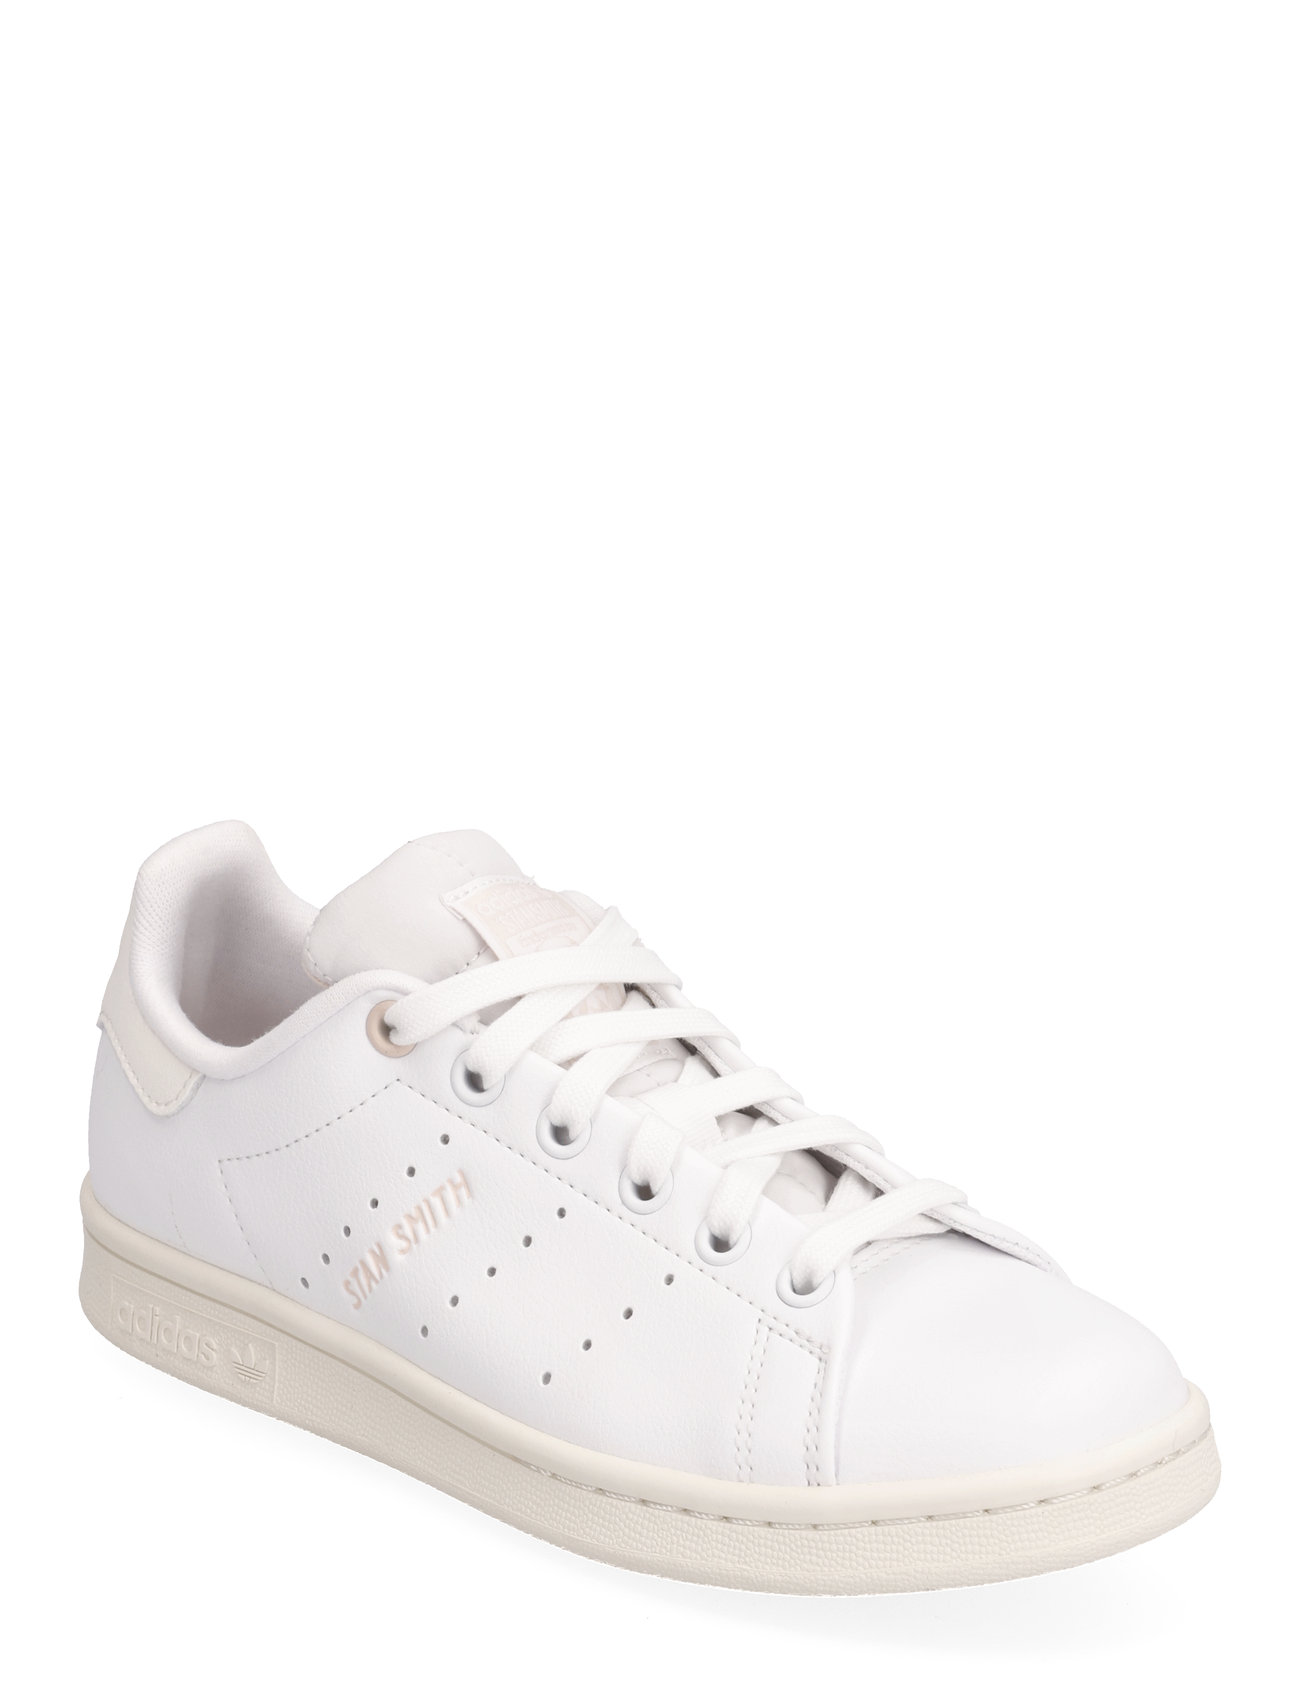 Stan Smith Shoes Sport Sneakers Low-top Sneakers White Adidas Originals